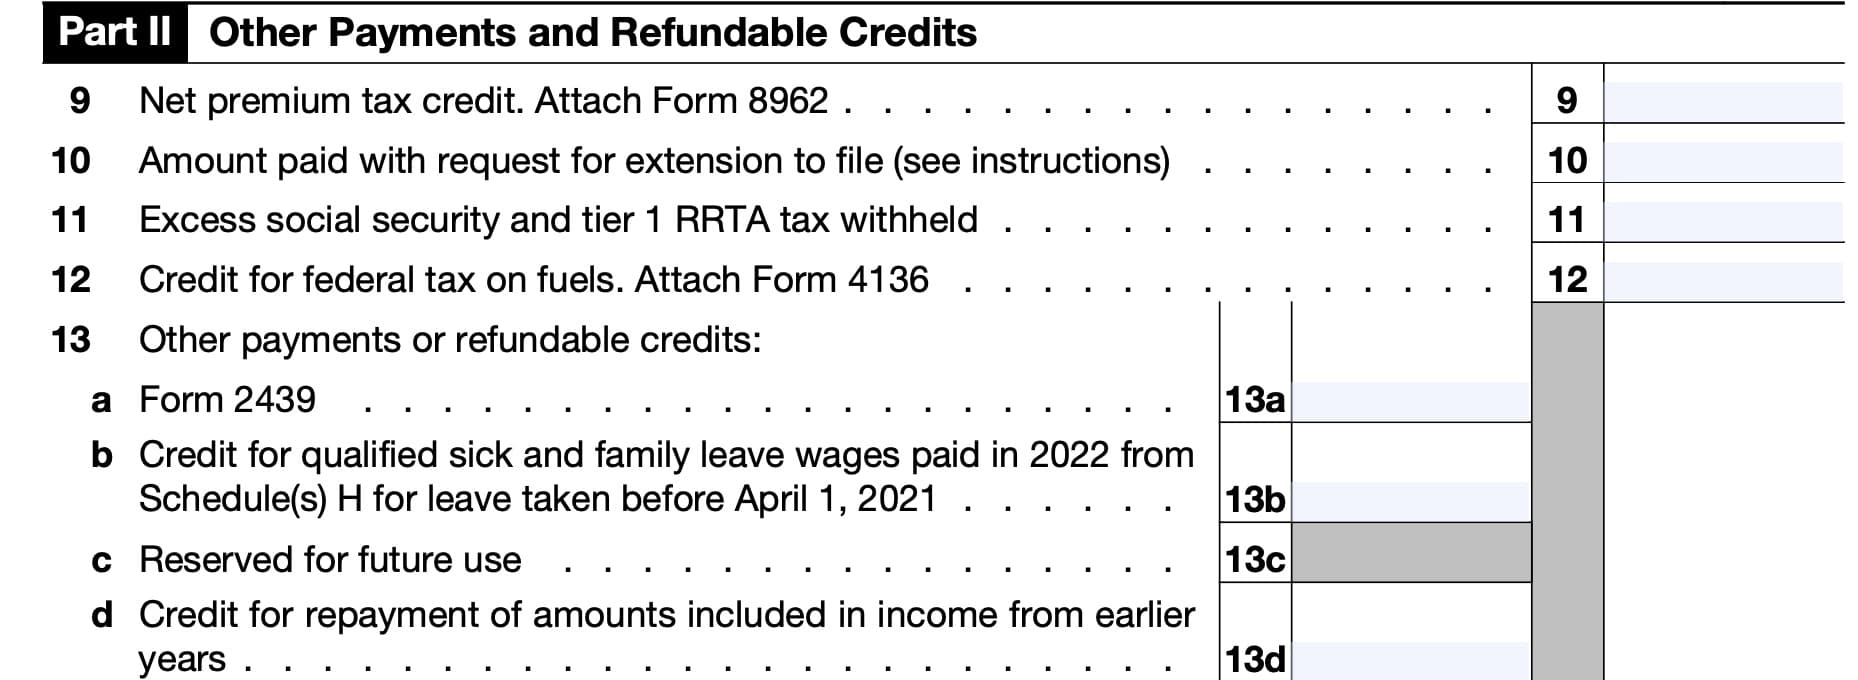 irs schedule 3, part II: other payments and refundable credits